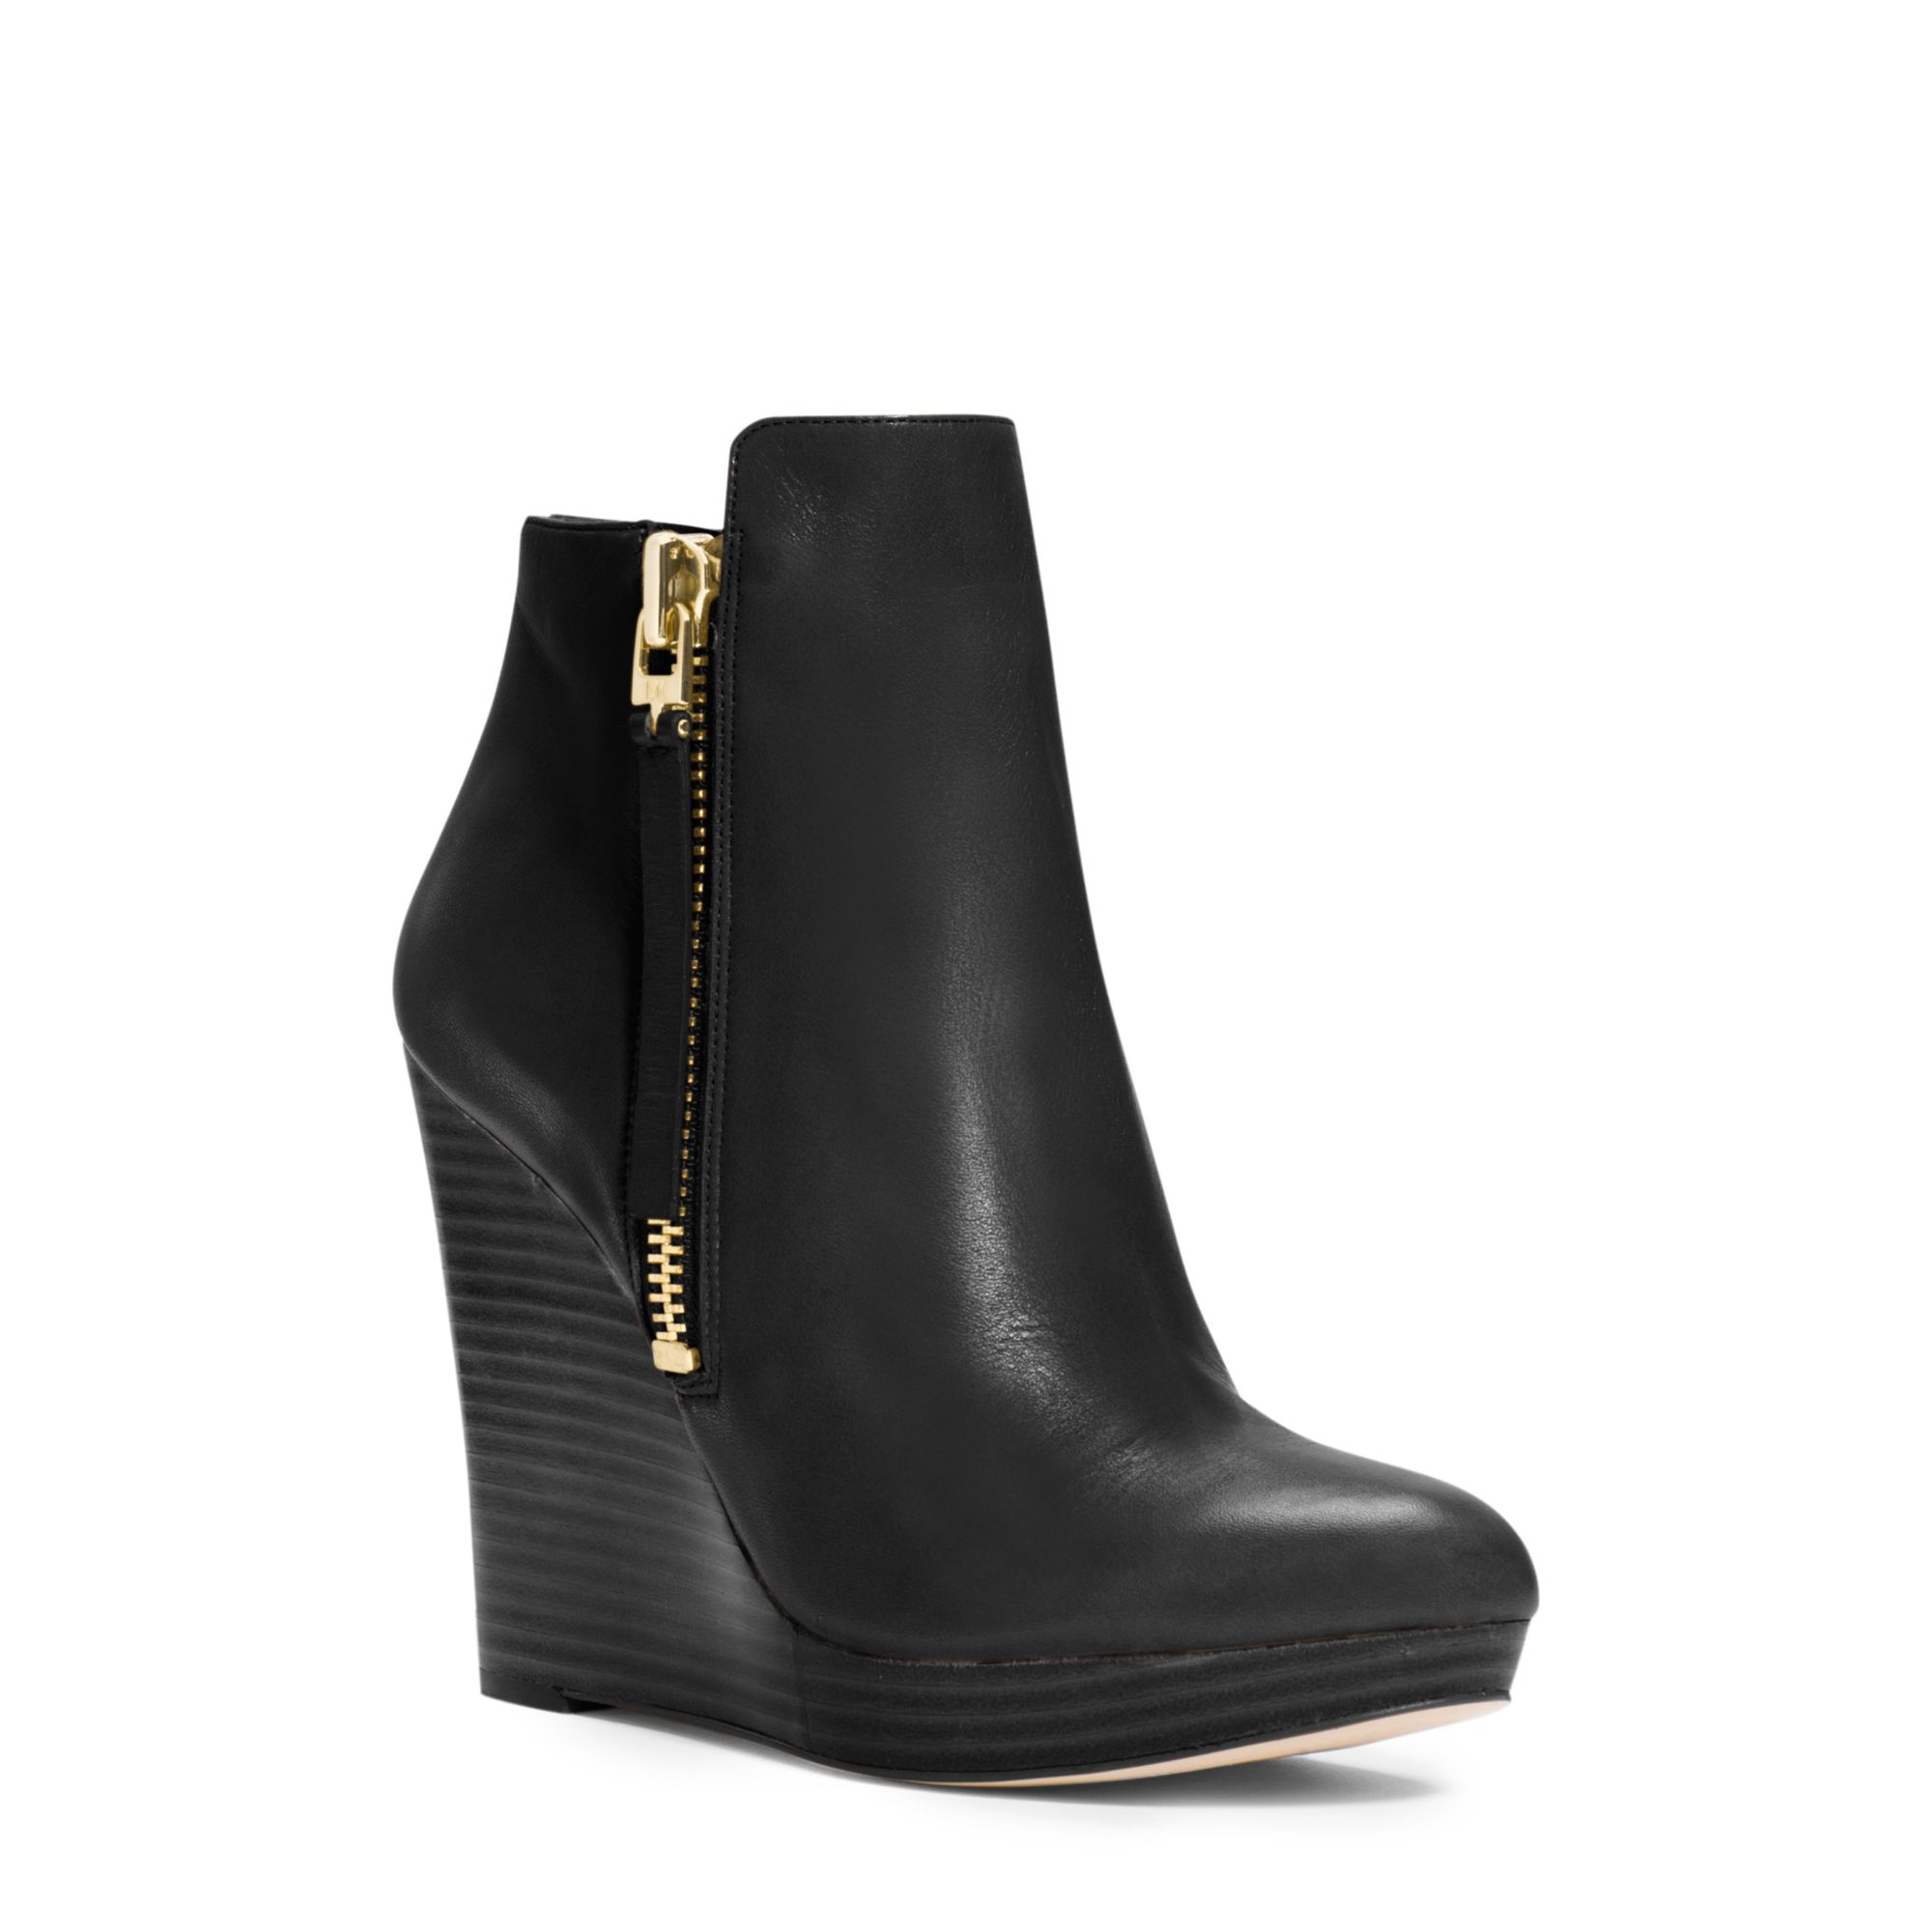 Michael Kors Clara Leather Wedge Ankle Boot in Black - Lyst